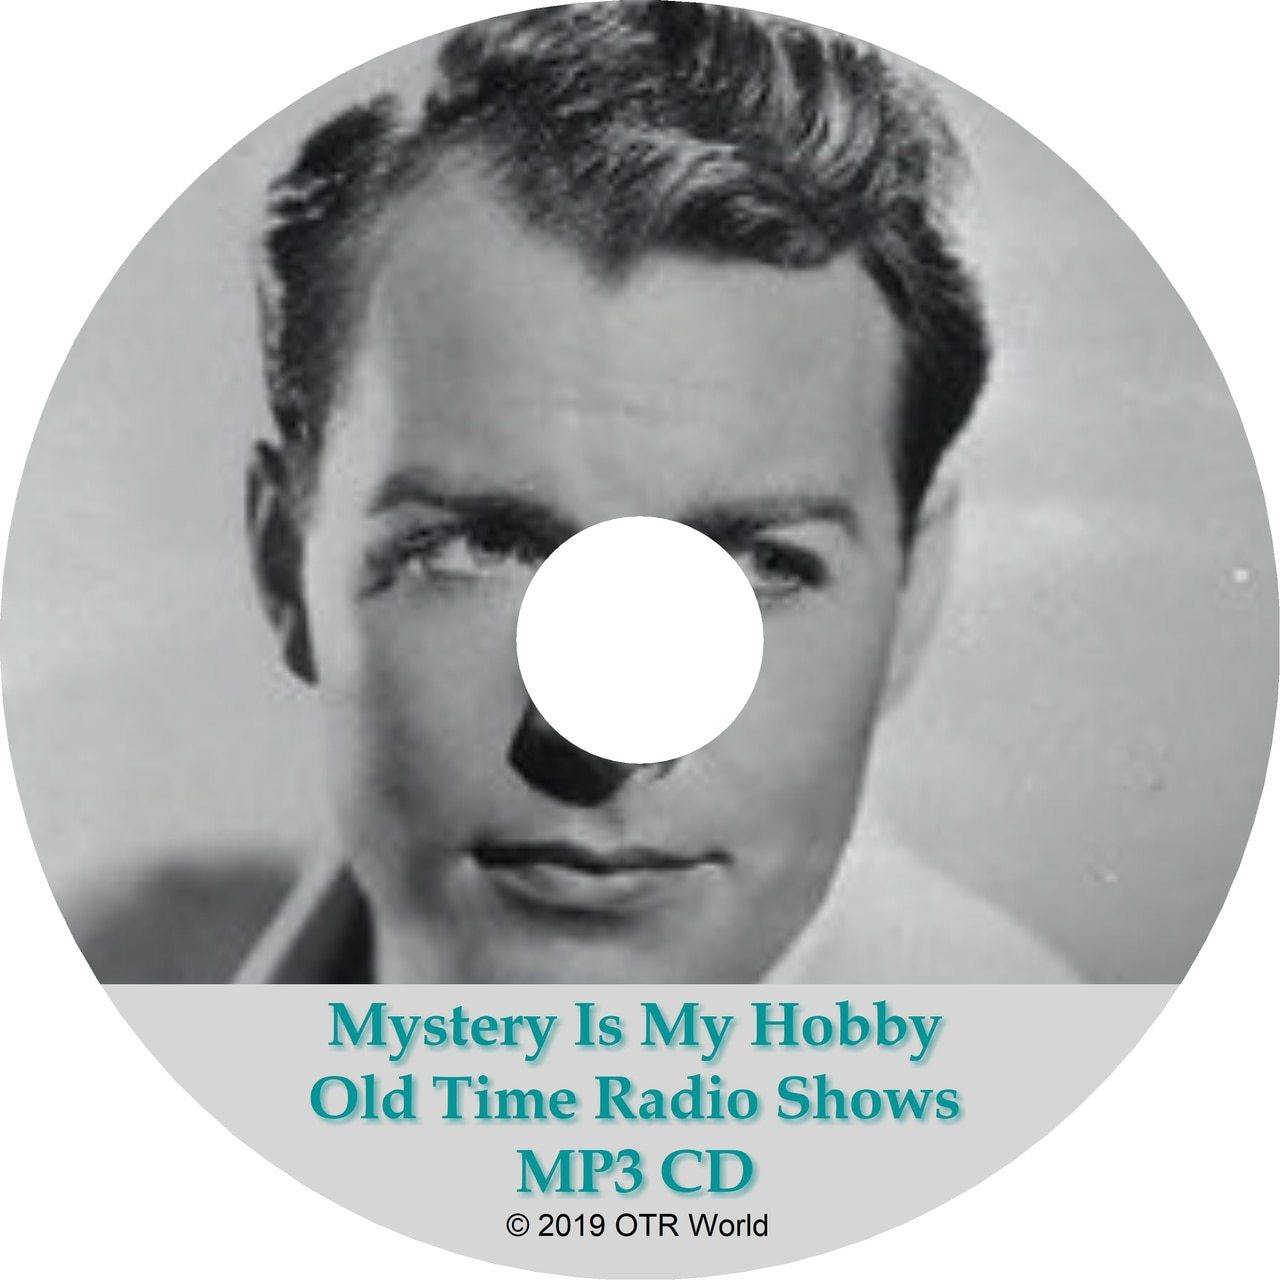 Mystery Is My Hobby Old Time Radio Shows 78 Episodes On MP3 CD - OTR World